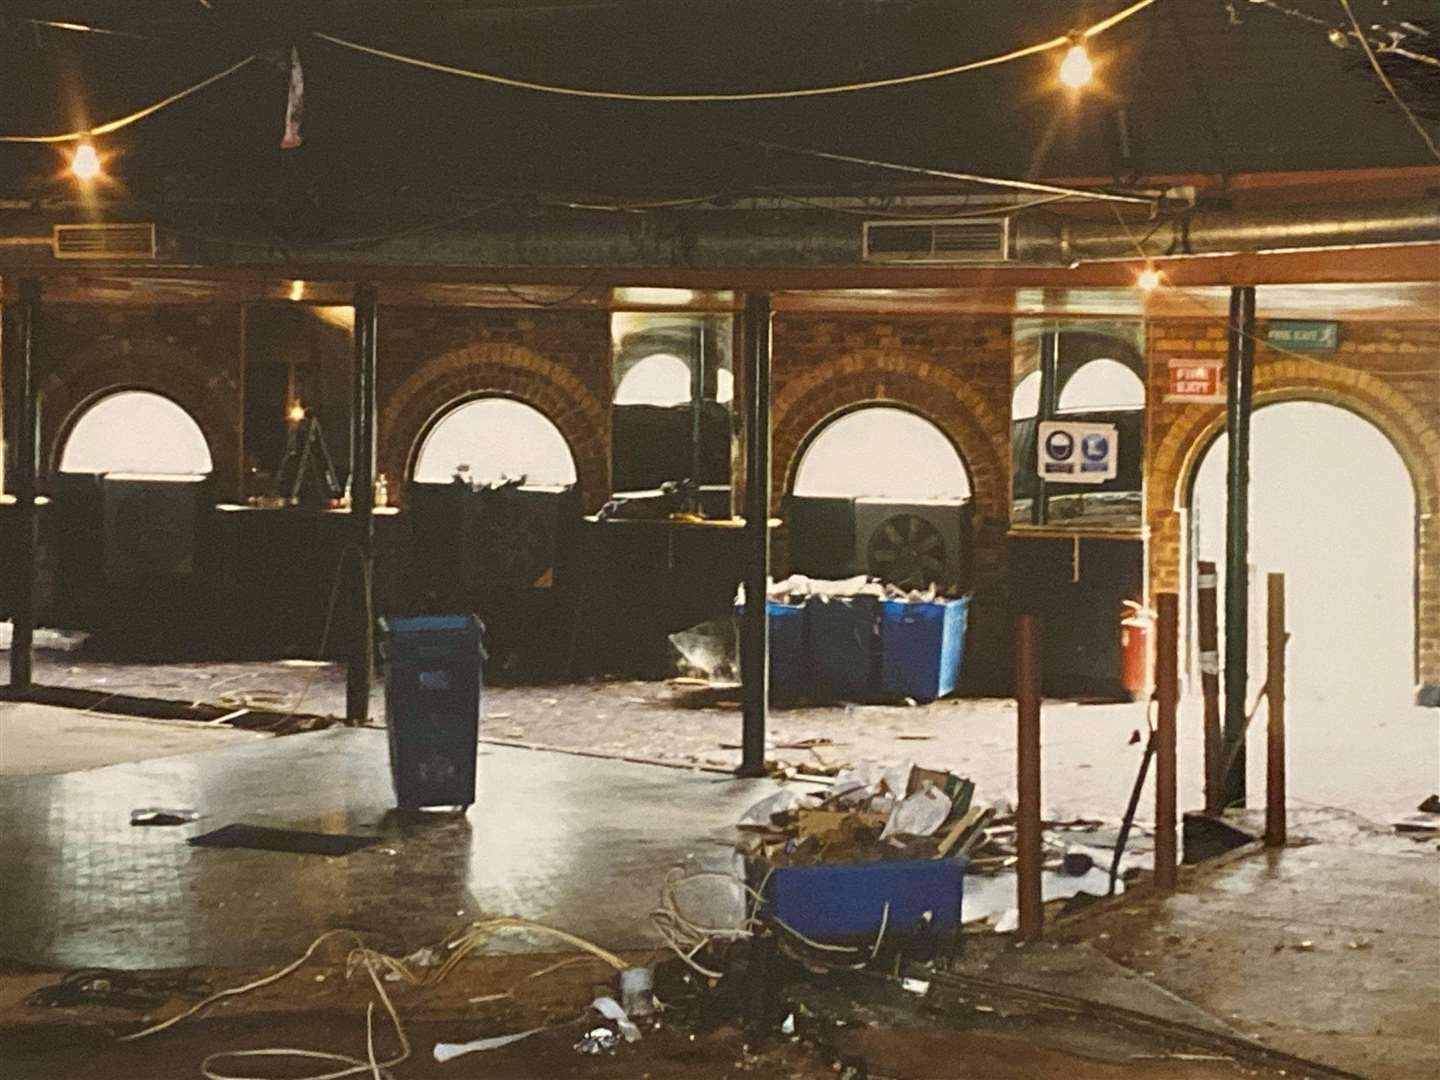 Cales being ripped out in preparation for Liquid in 2001